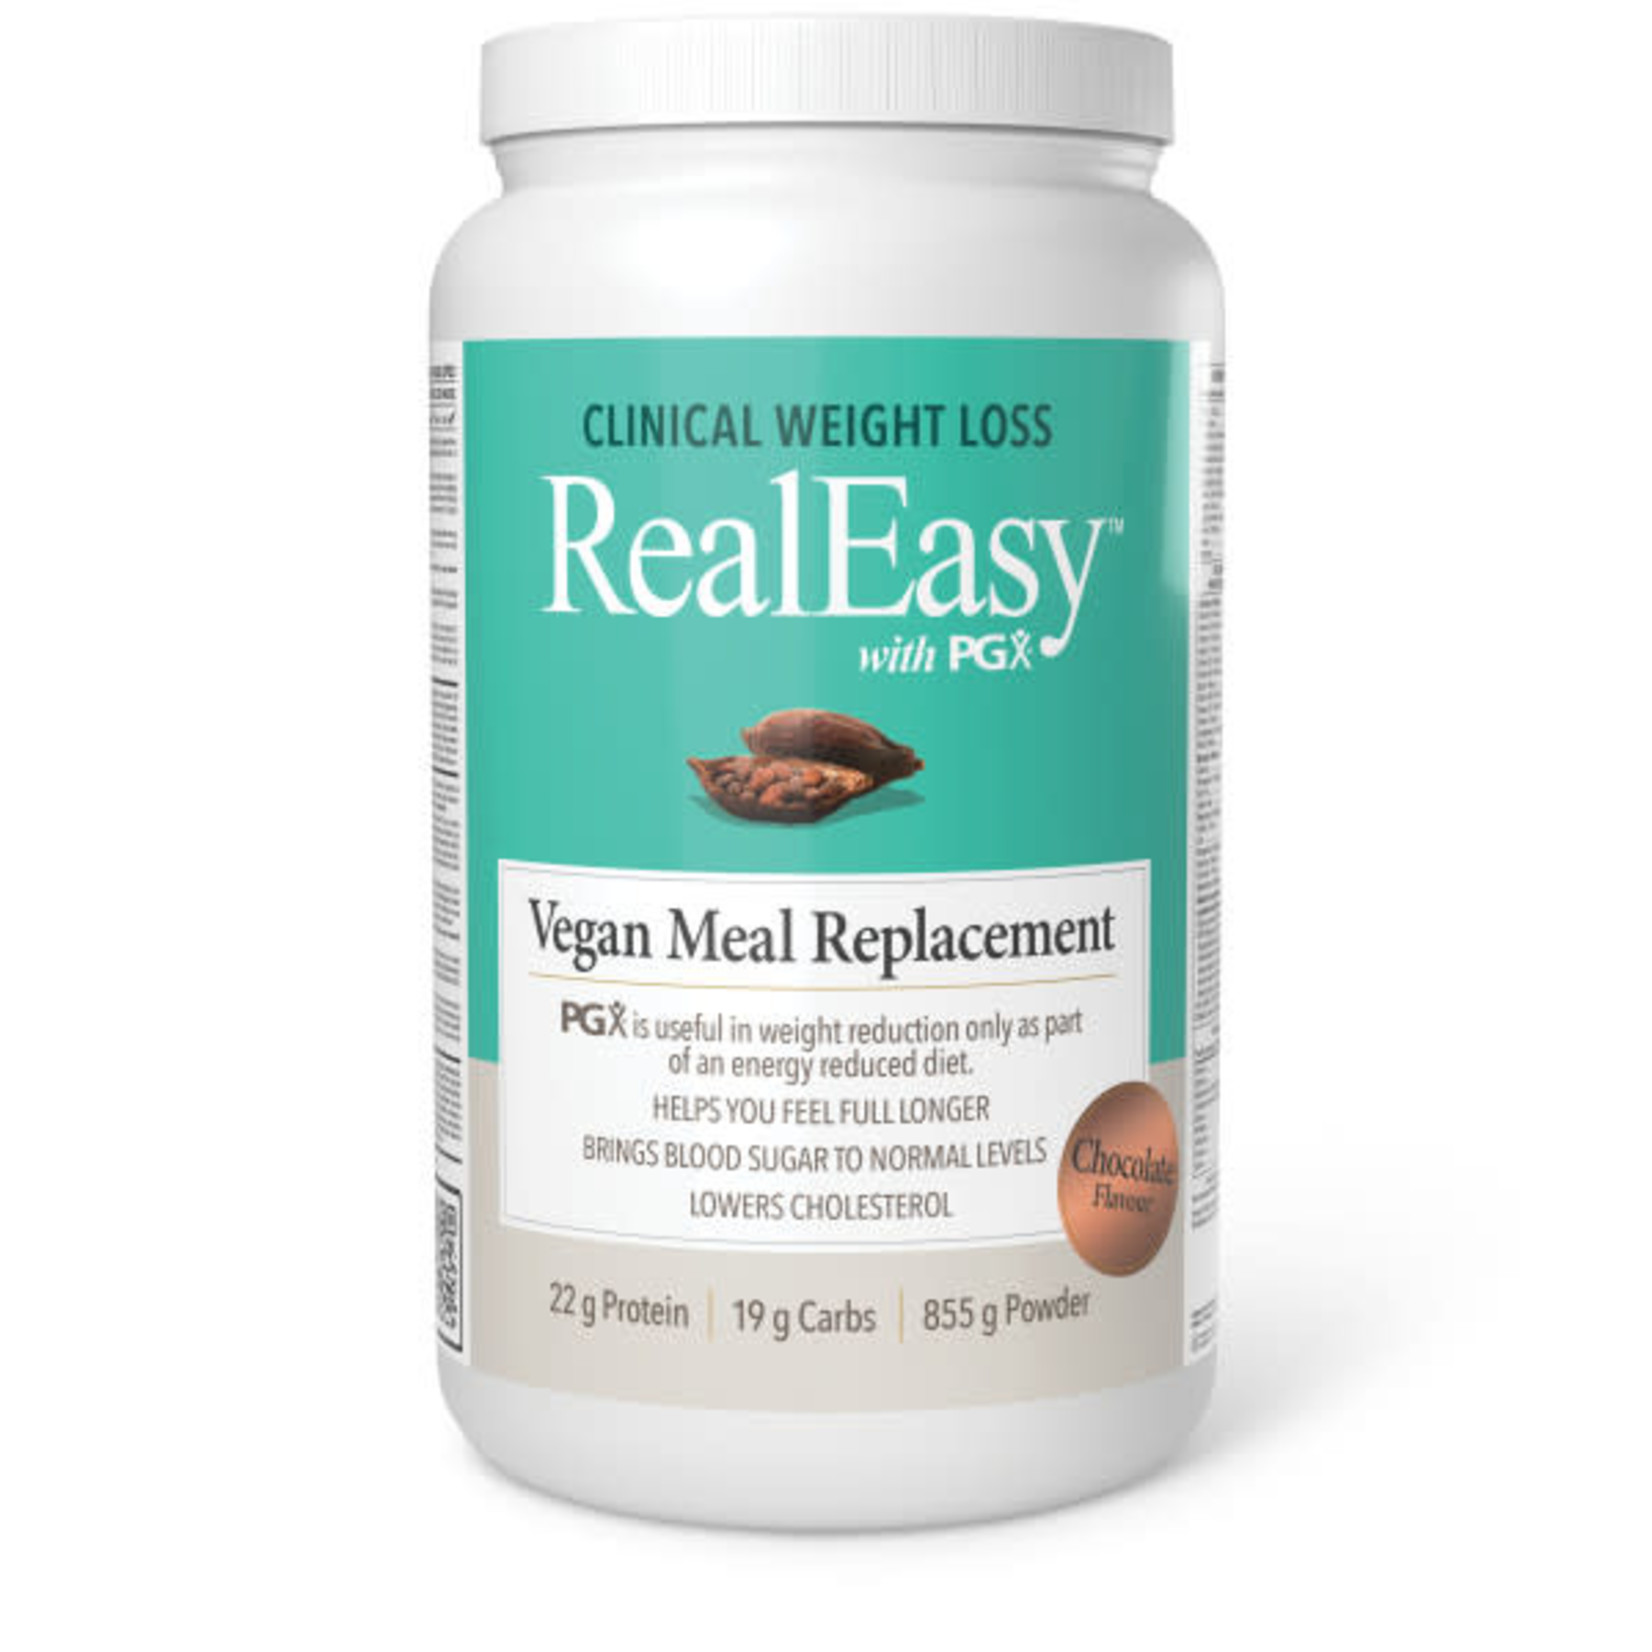 NATURAL FACTORS NATURAL FACTORS REAL EASY WITH PGX VEGAN MEAL REPLACEMENT CHOCOLATE 855G